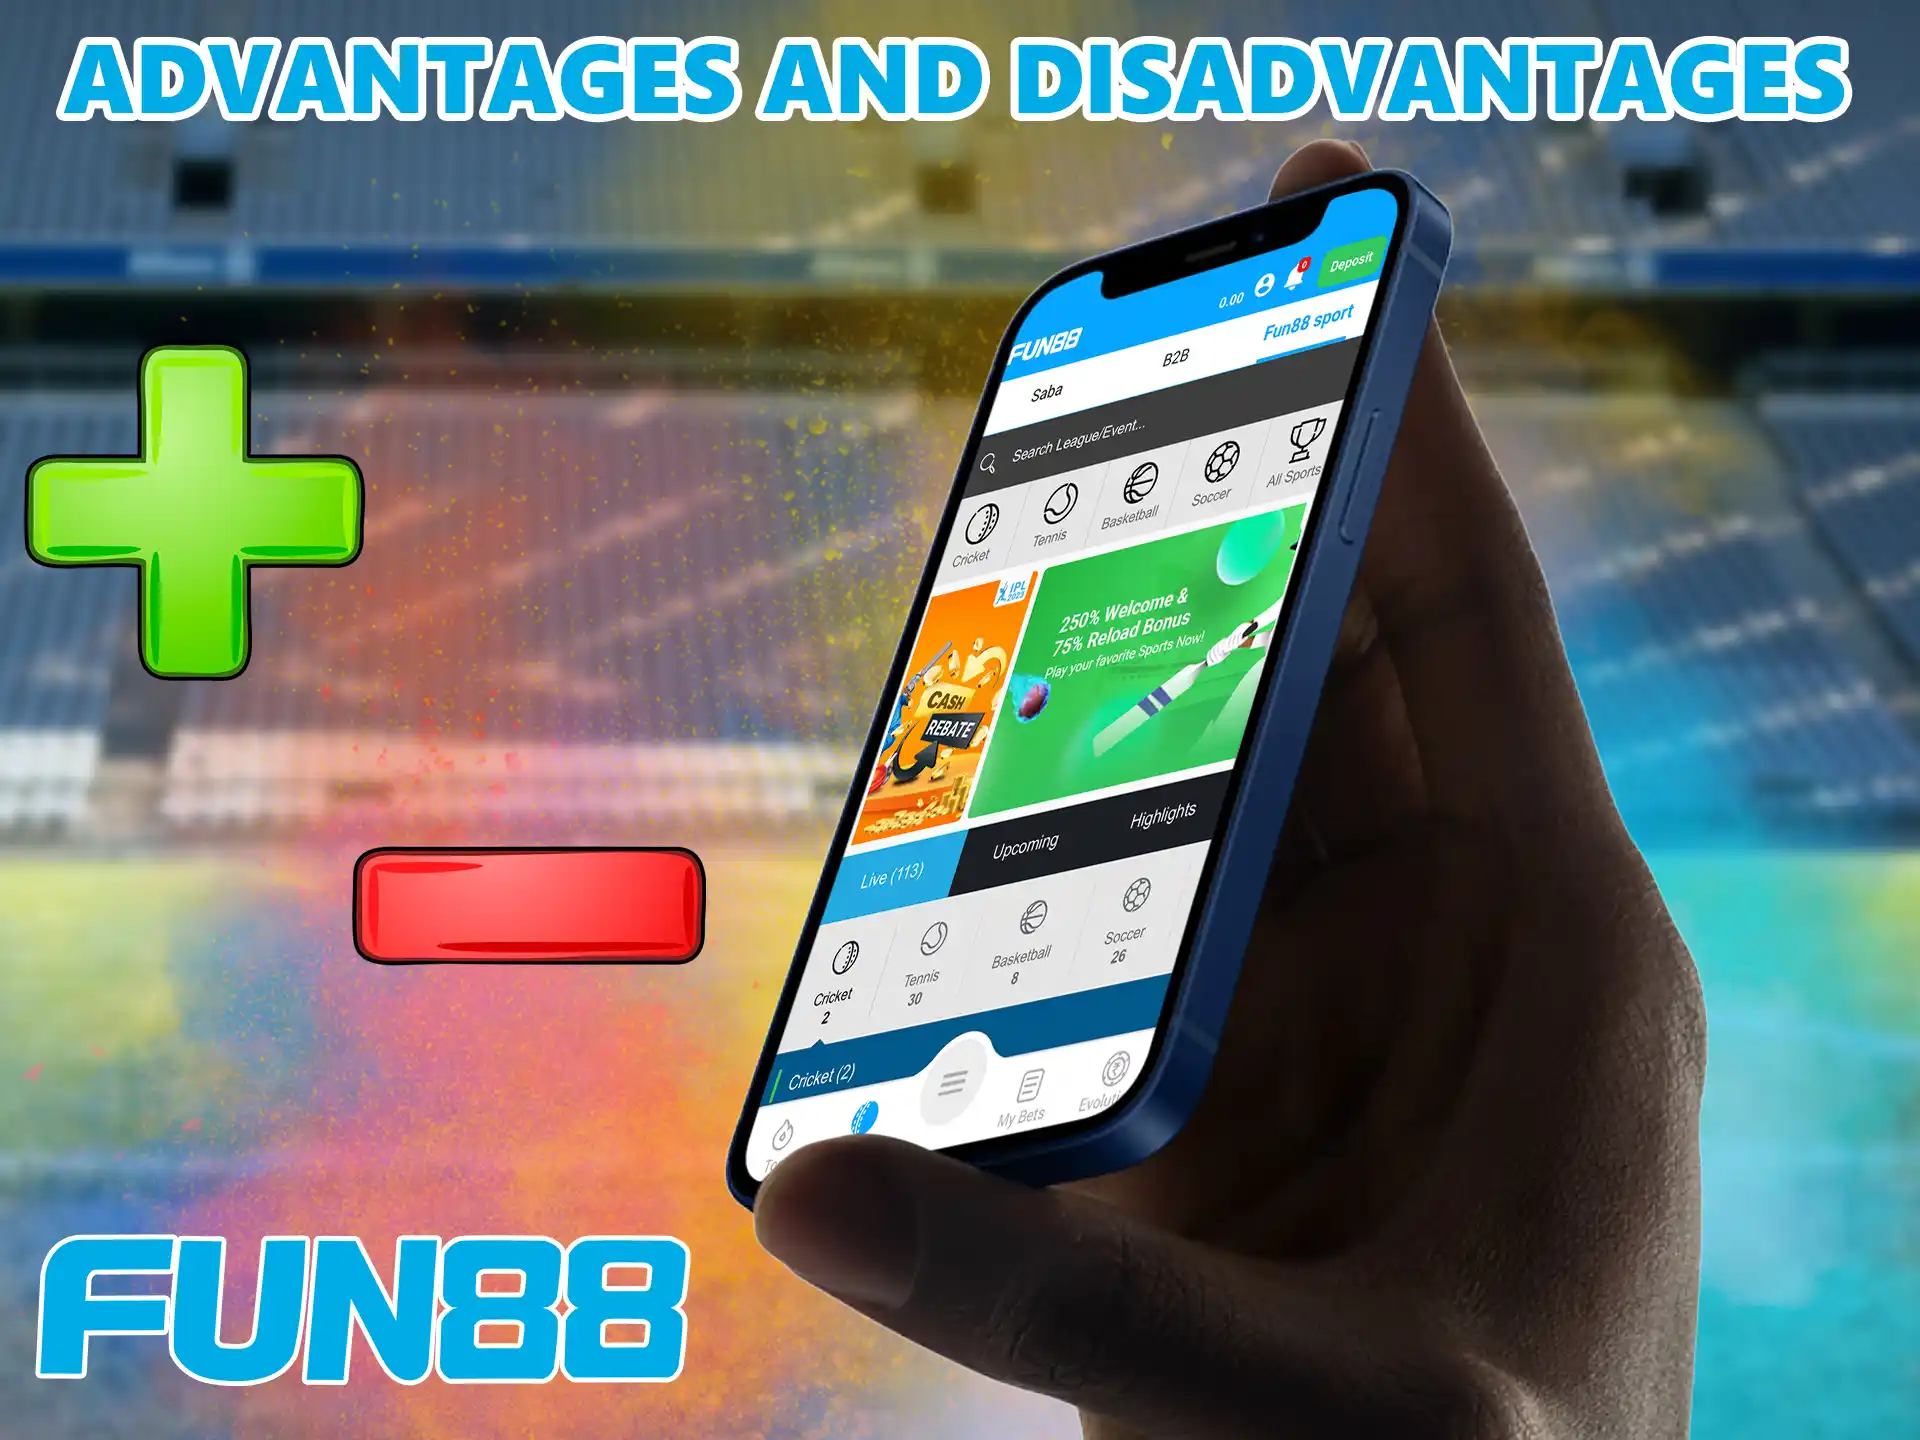 Thanks to our experience you can know about the strengths and weaknesses of the Fun88 betting app.